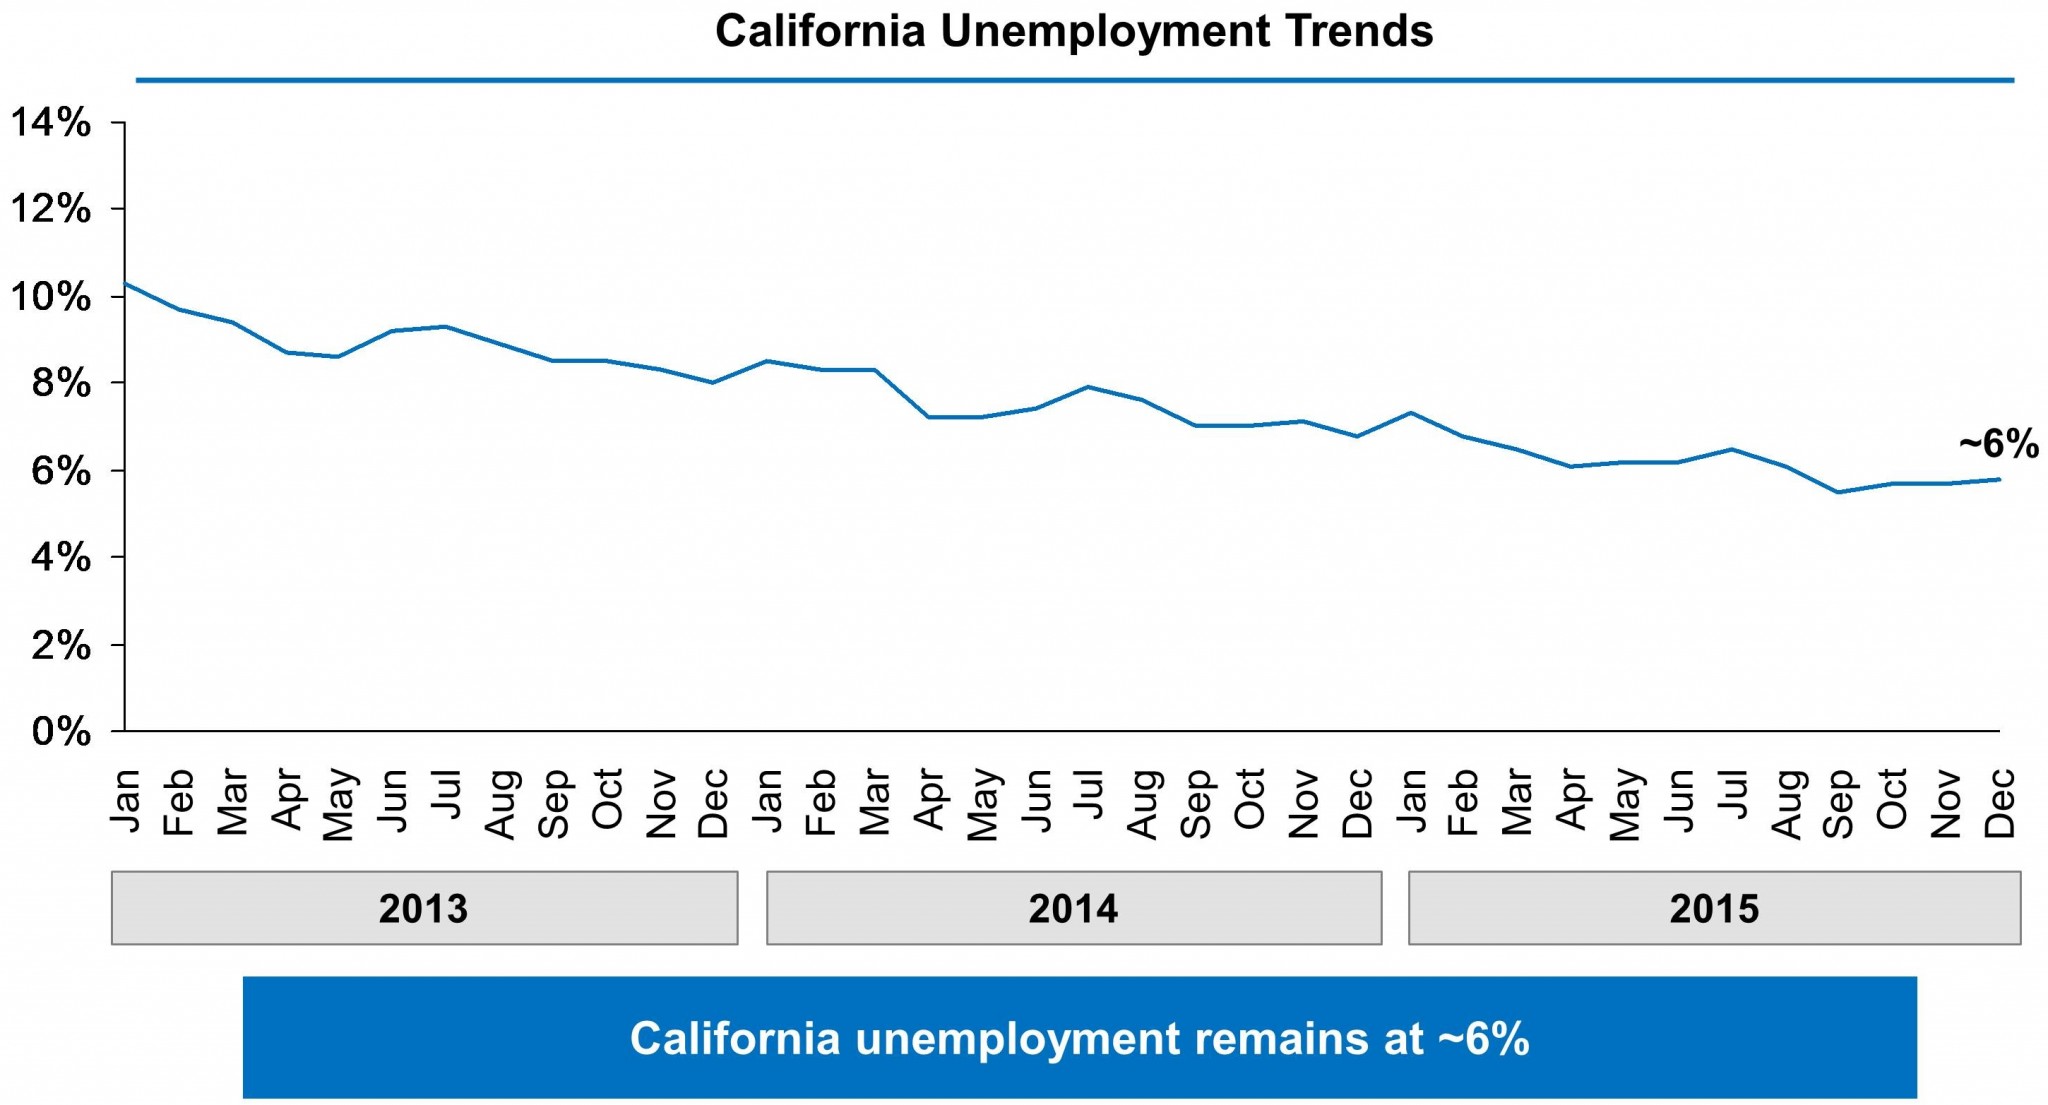 Chart showing California’s unemployment rate falling from 10% in January 2013 to approximately 6% in December 2015.